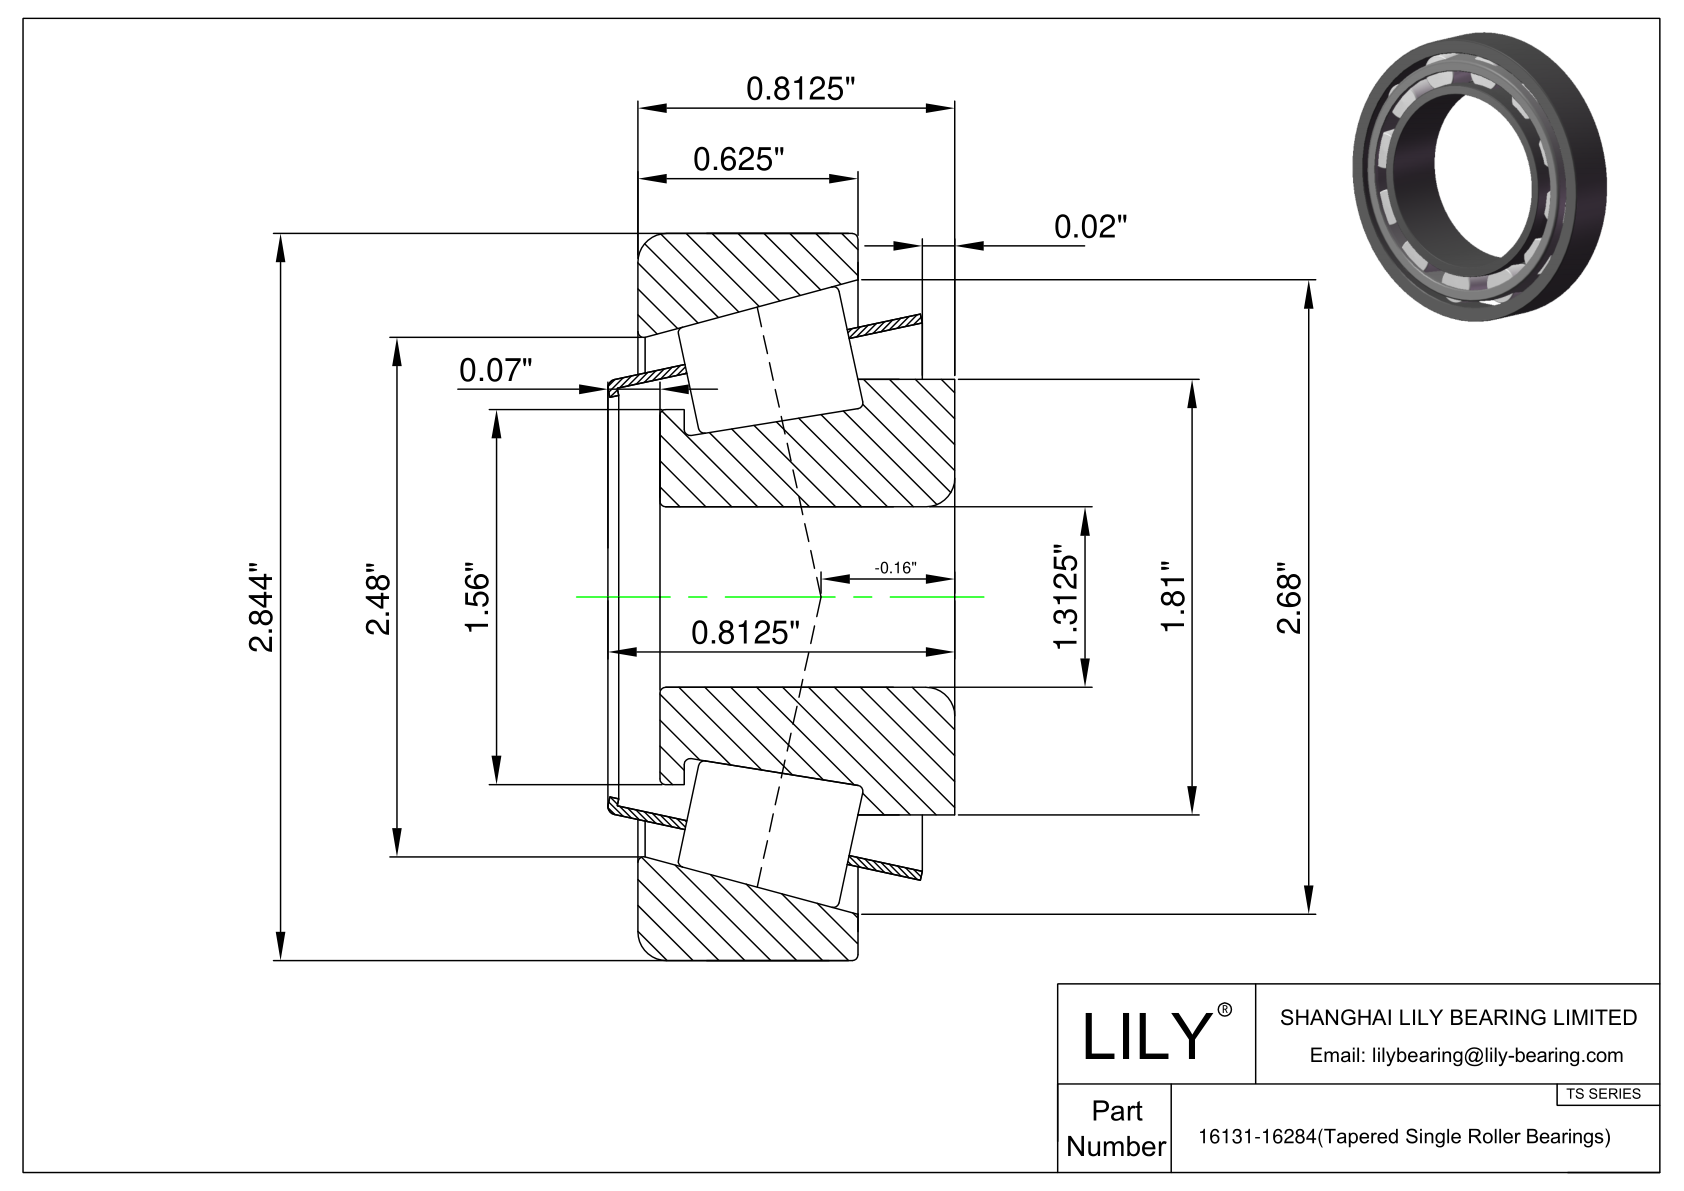 16131-16284 TS (Tapered Single Roller Bearings) (Imperial) cad drawing